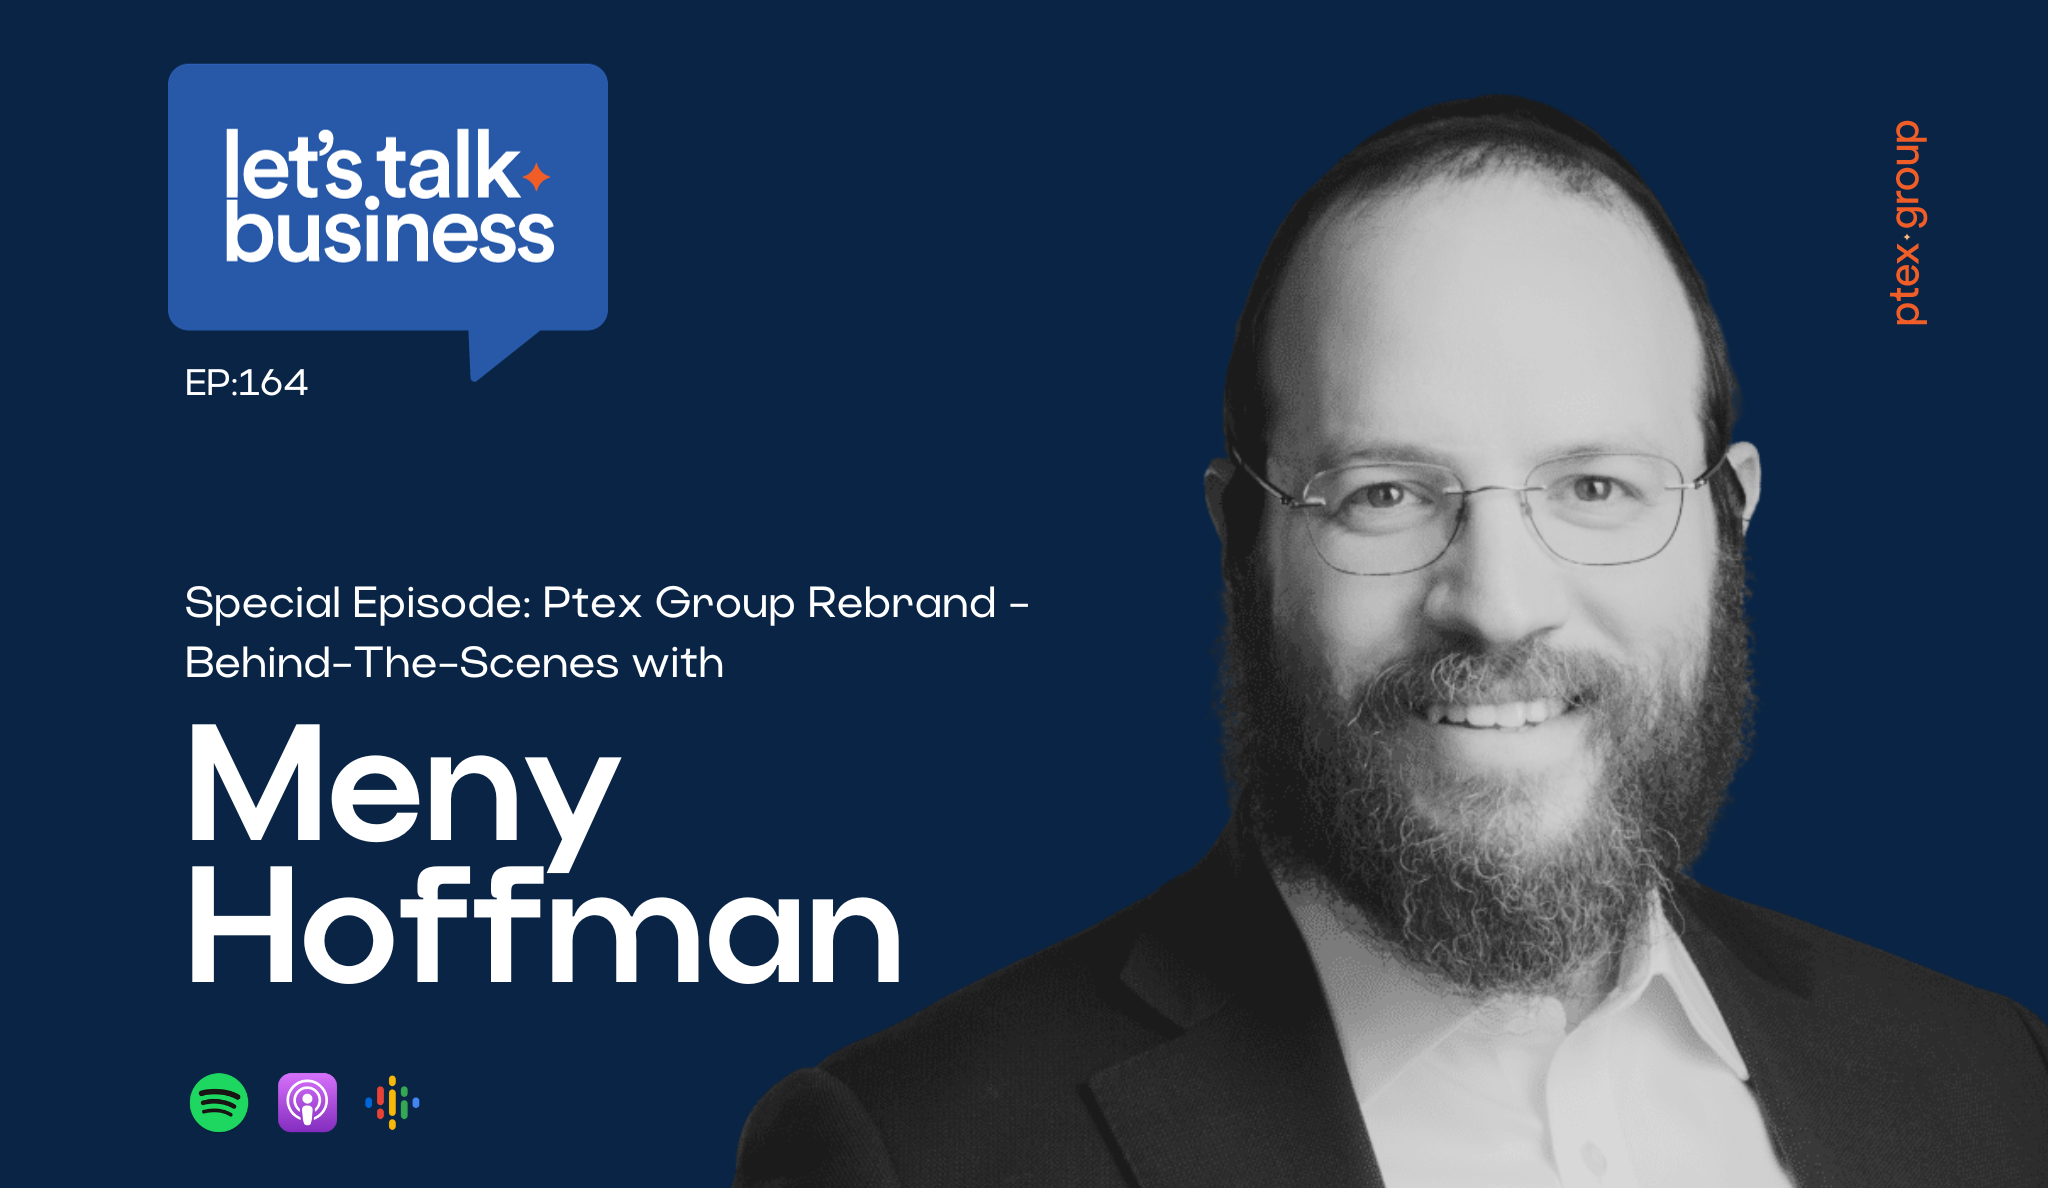 Special Episode: Ptex Group Rebrand - Behind-The-Scenes with Meny Hoffman